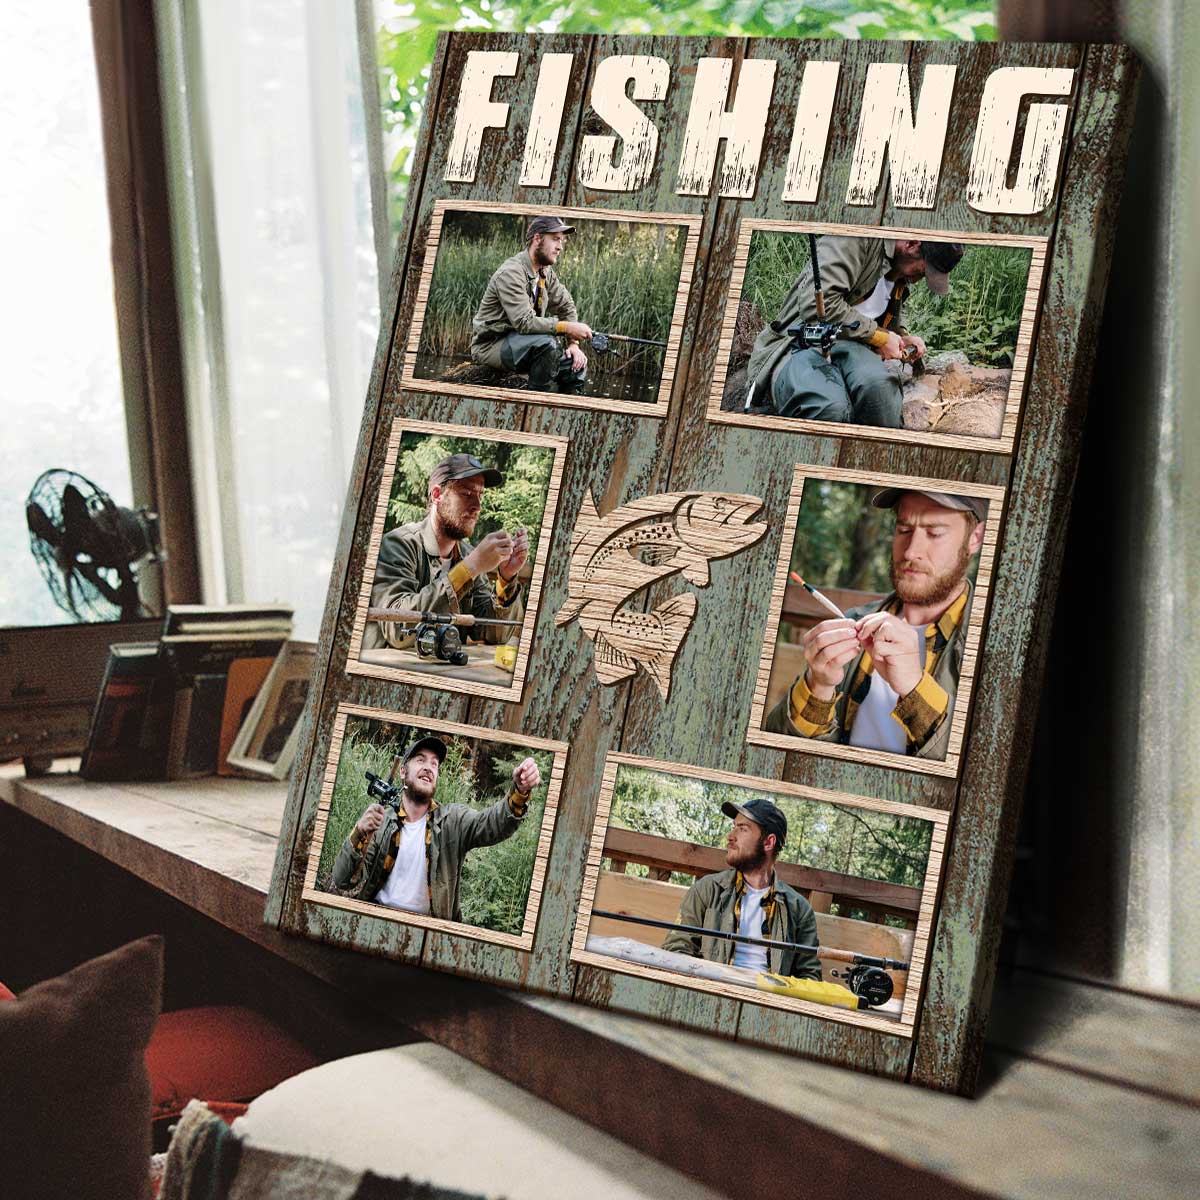 https://benicee.com/wp-content/uploads/2022/09/Custom-Fishing-Photo-Collage-Canvas-Best-Gifts-For-Fisherman-Fishing-Gifts-For-Men-3.jpg